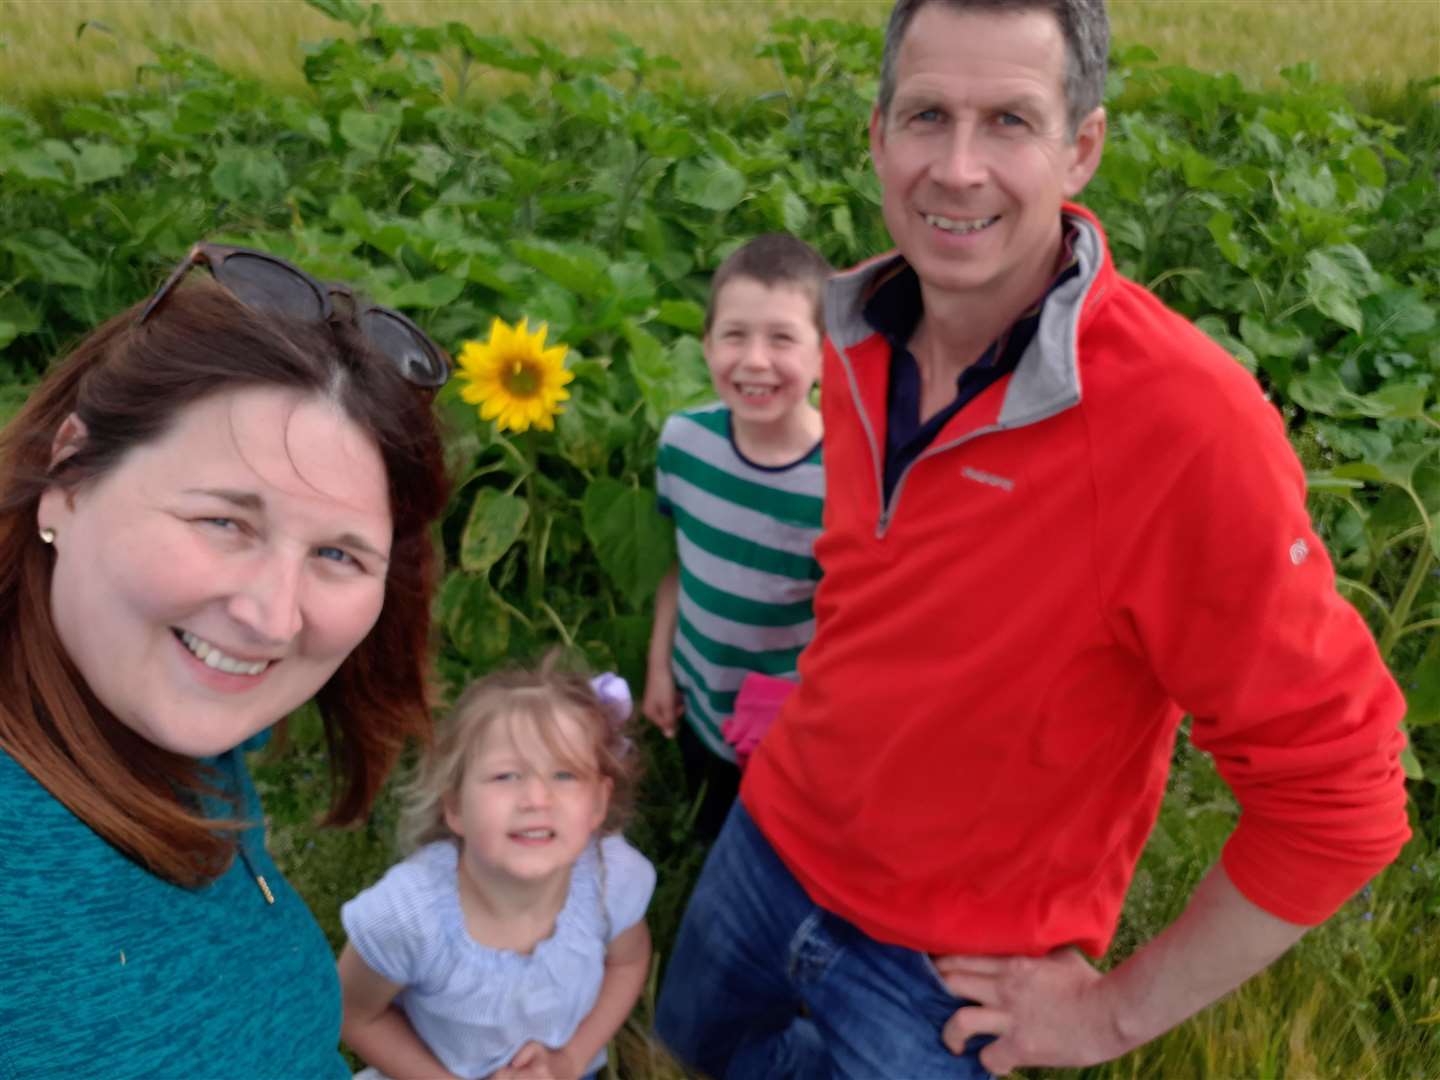 Byres Farm owners Bill and Helen Smith and their children, Marshall and Louisa, with the first sunflower of the crop to bloom.